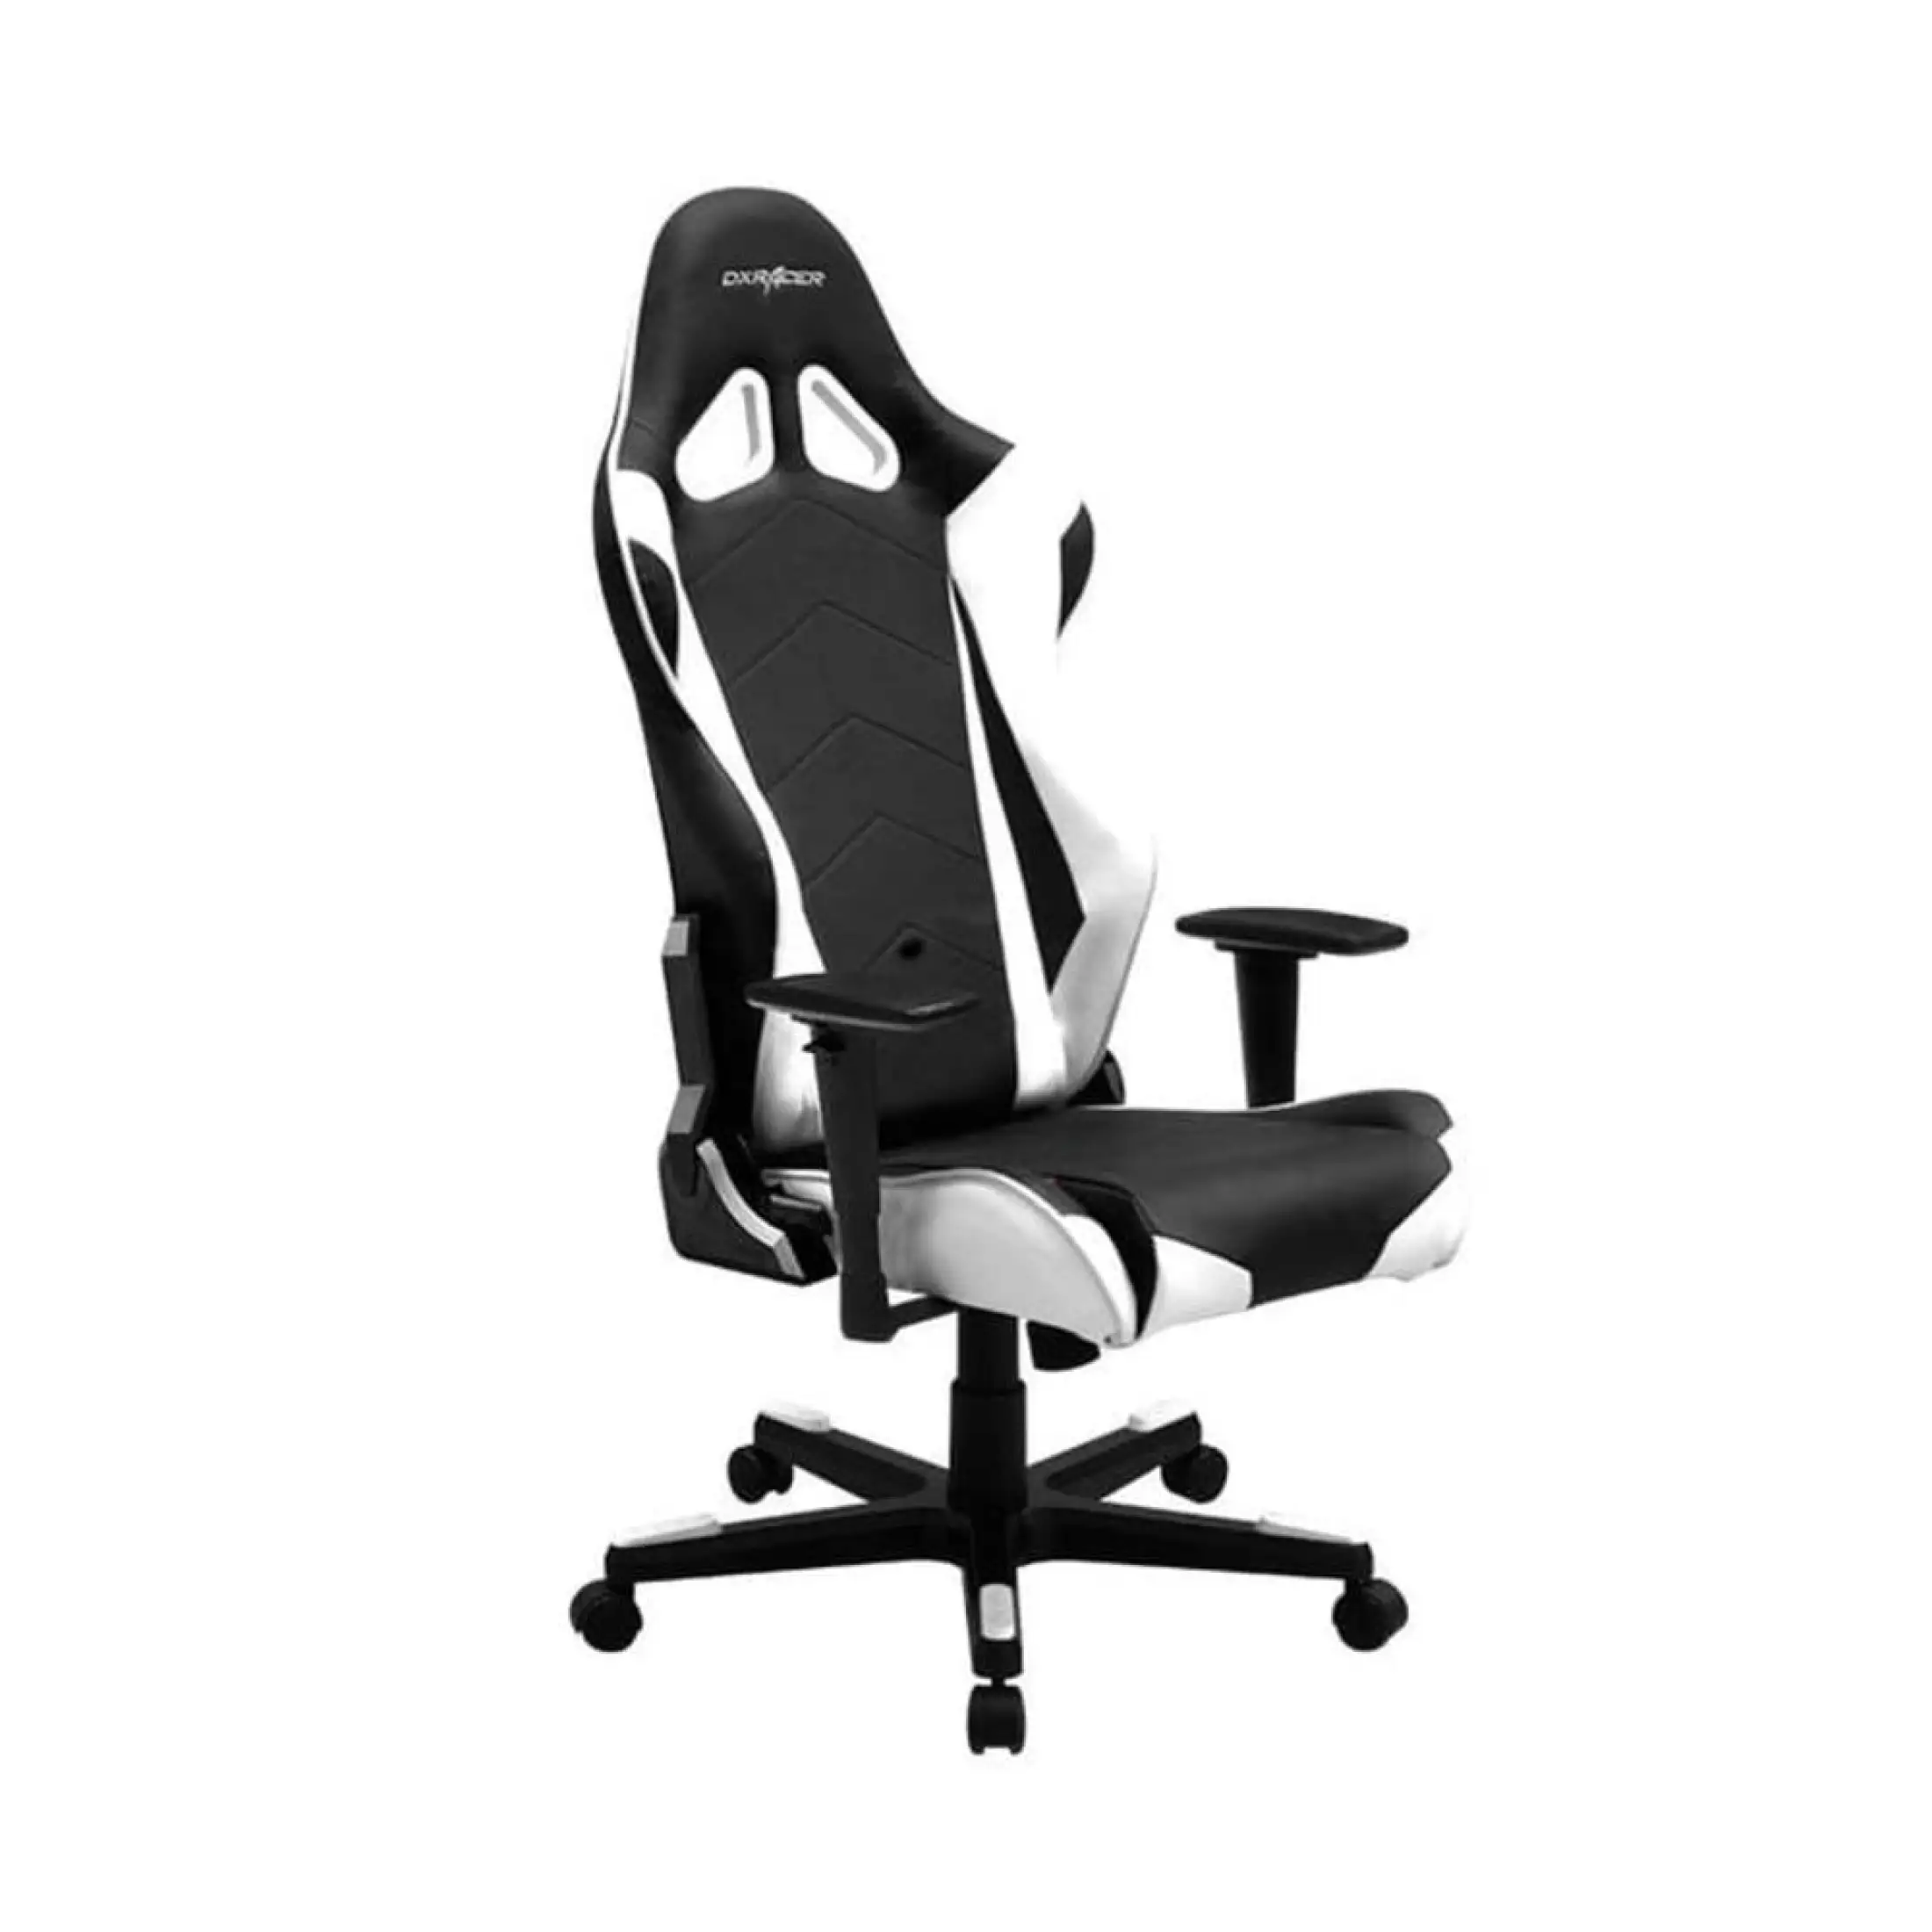 Dx Racer Racing Dxracer Racing Series Oh Rz0 Nw Black White Lazada Indonesia